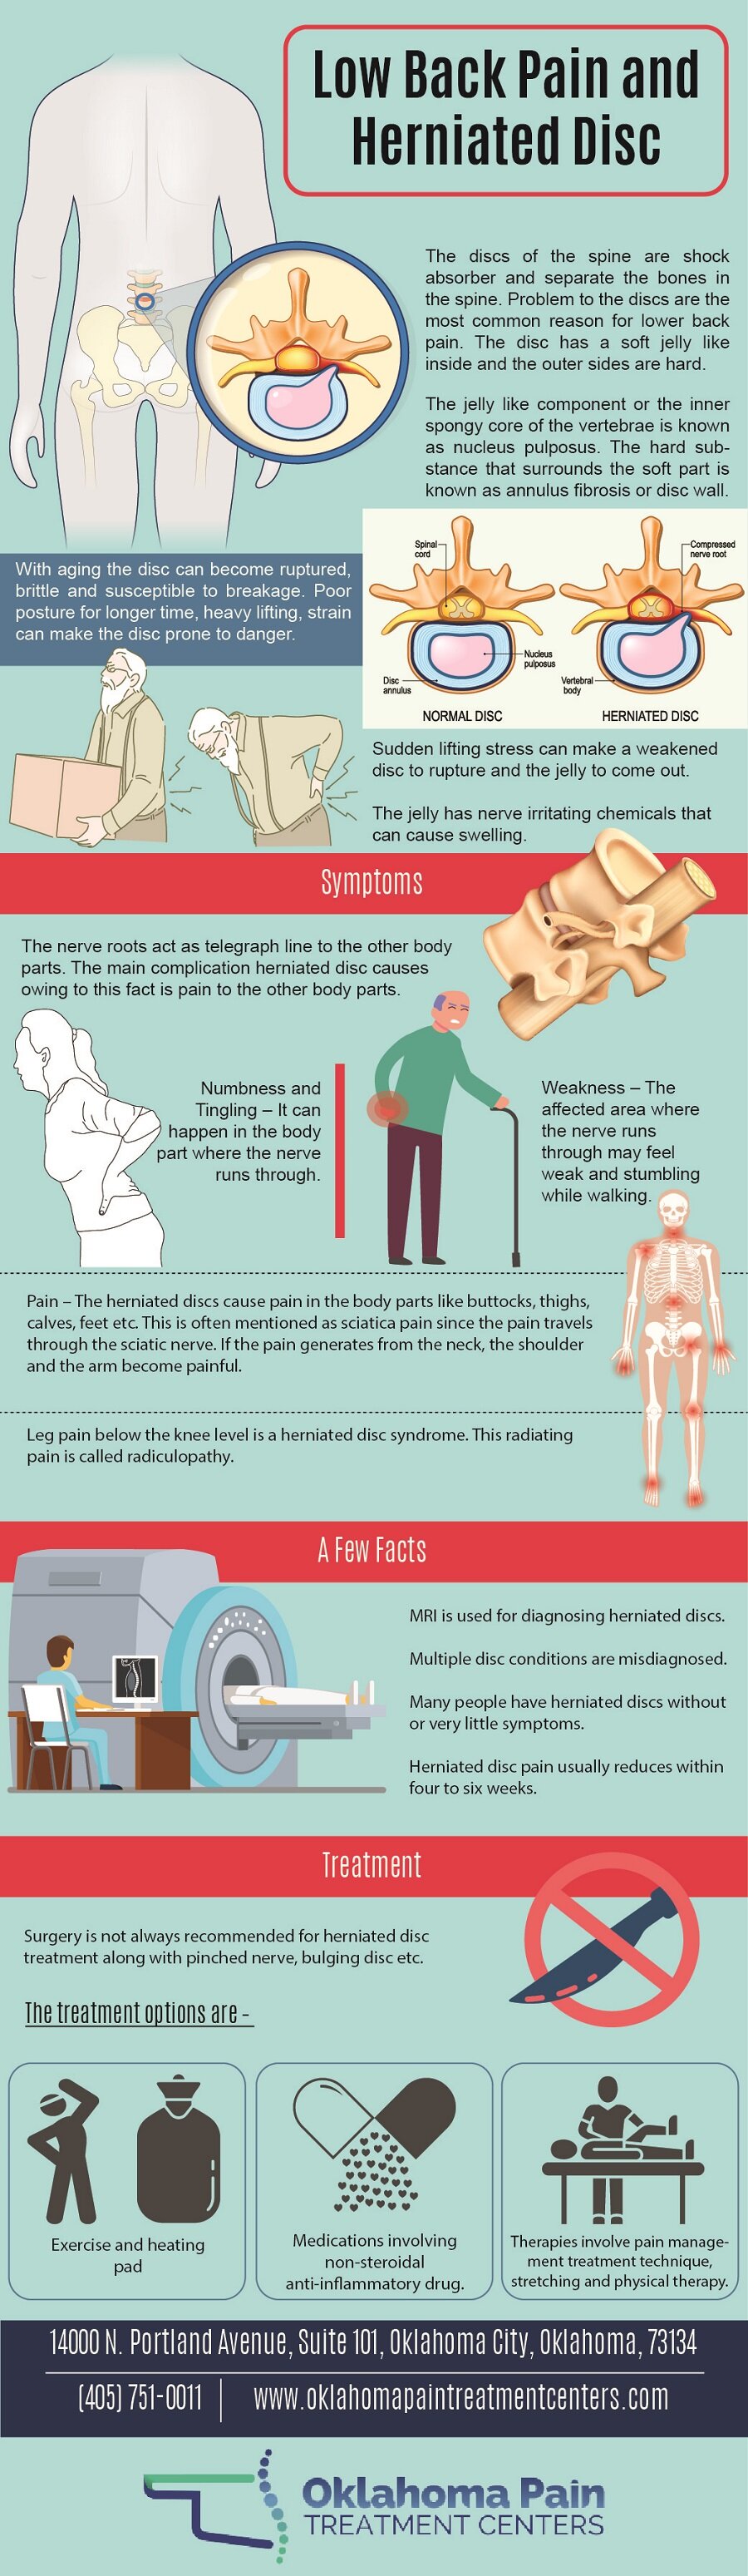 Low Back pain and Herniated Disc (Infographic)